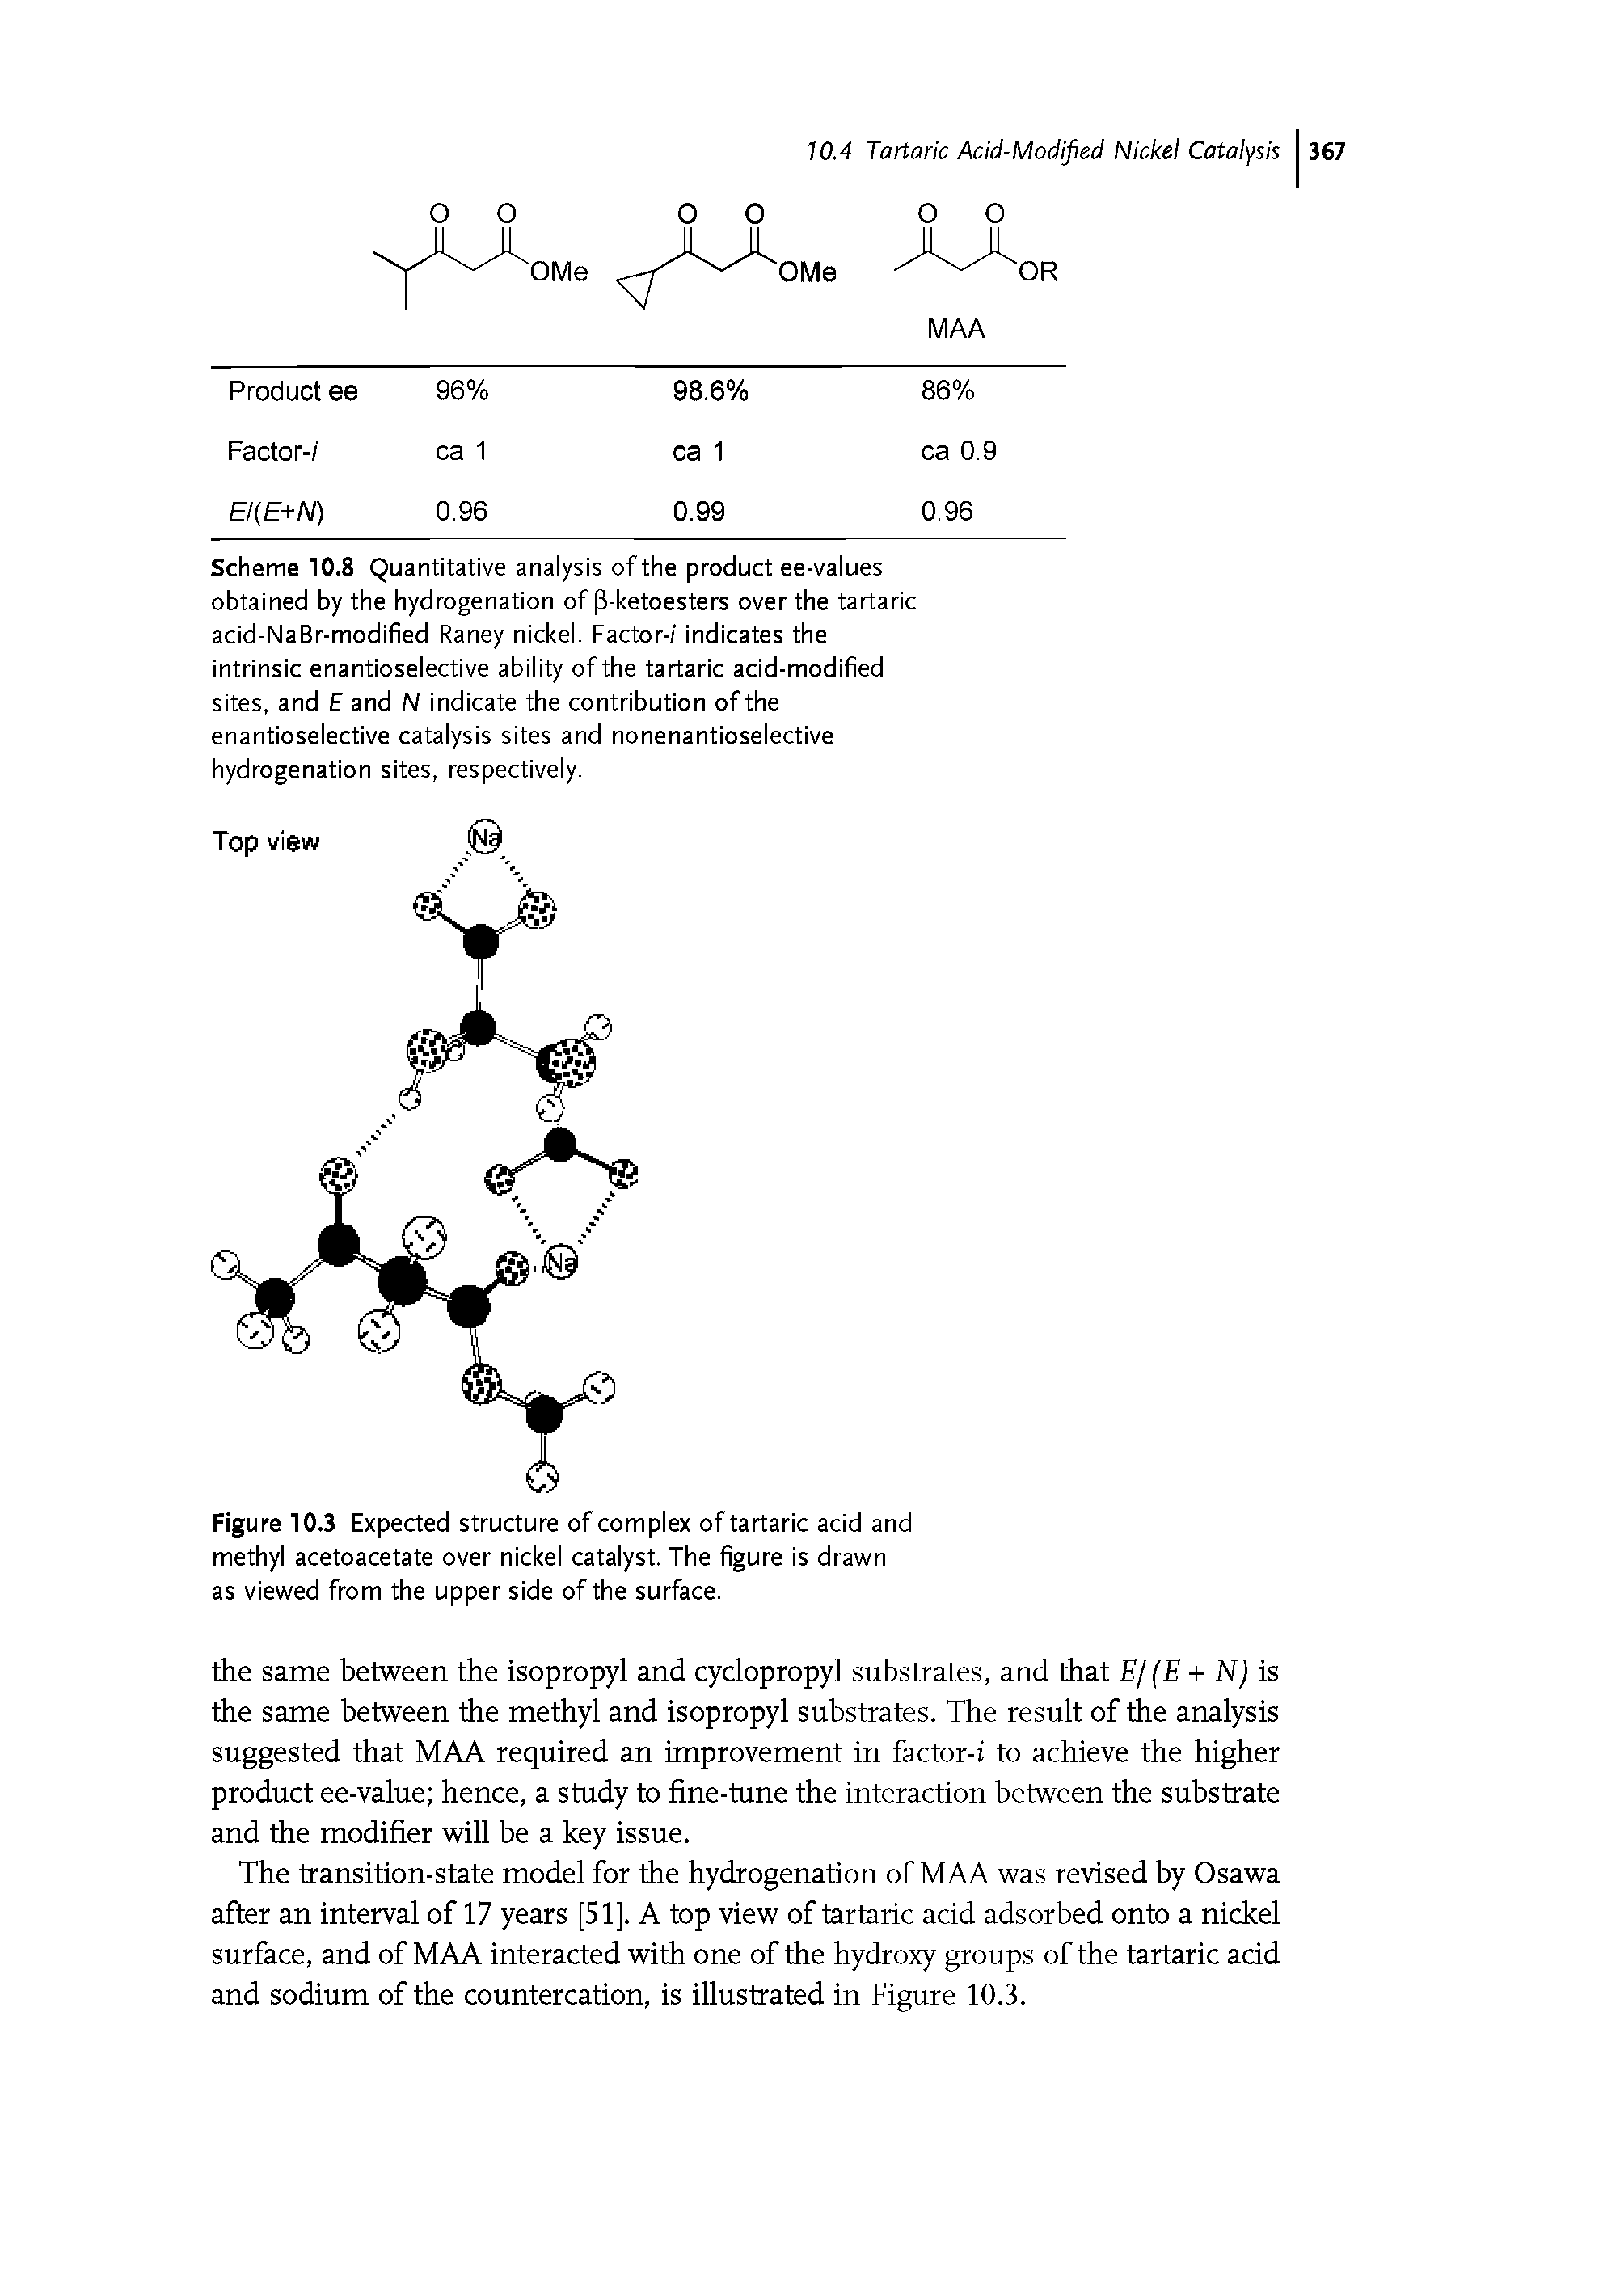 Scheme 10.8 Quantitative analysis of the product ee-values obtained by the hydrogenation of P-ketoesters over the tartaric acid-NaBr-modified Raney nickel. Factor-/ indicates the intrinsic enantioselective ability of the tartaric acid-modified sites, and E and N indicate the contribution of the enantioselective catalysis sites and nonenantioselective hydrogenation sites, respectively.